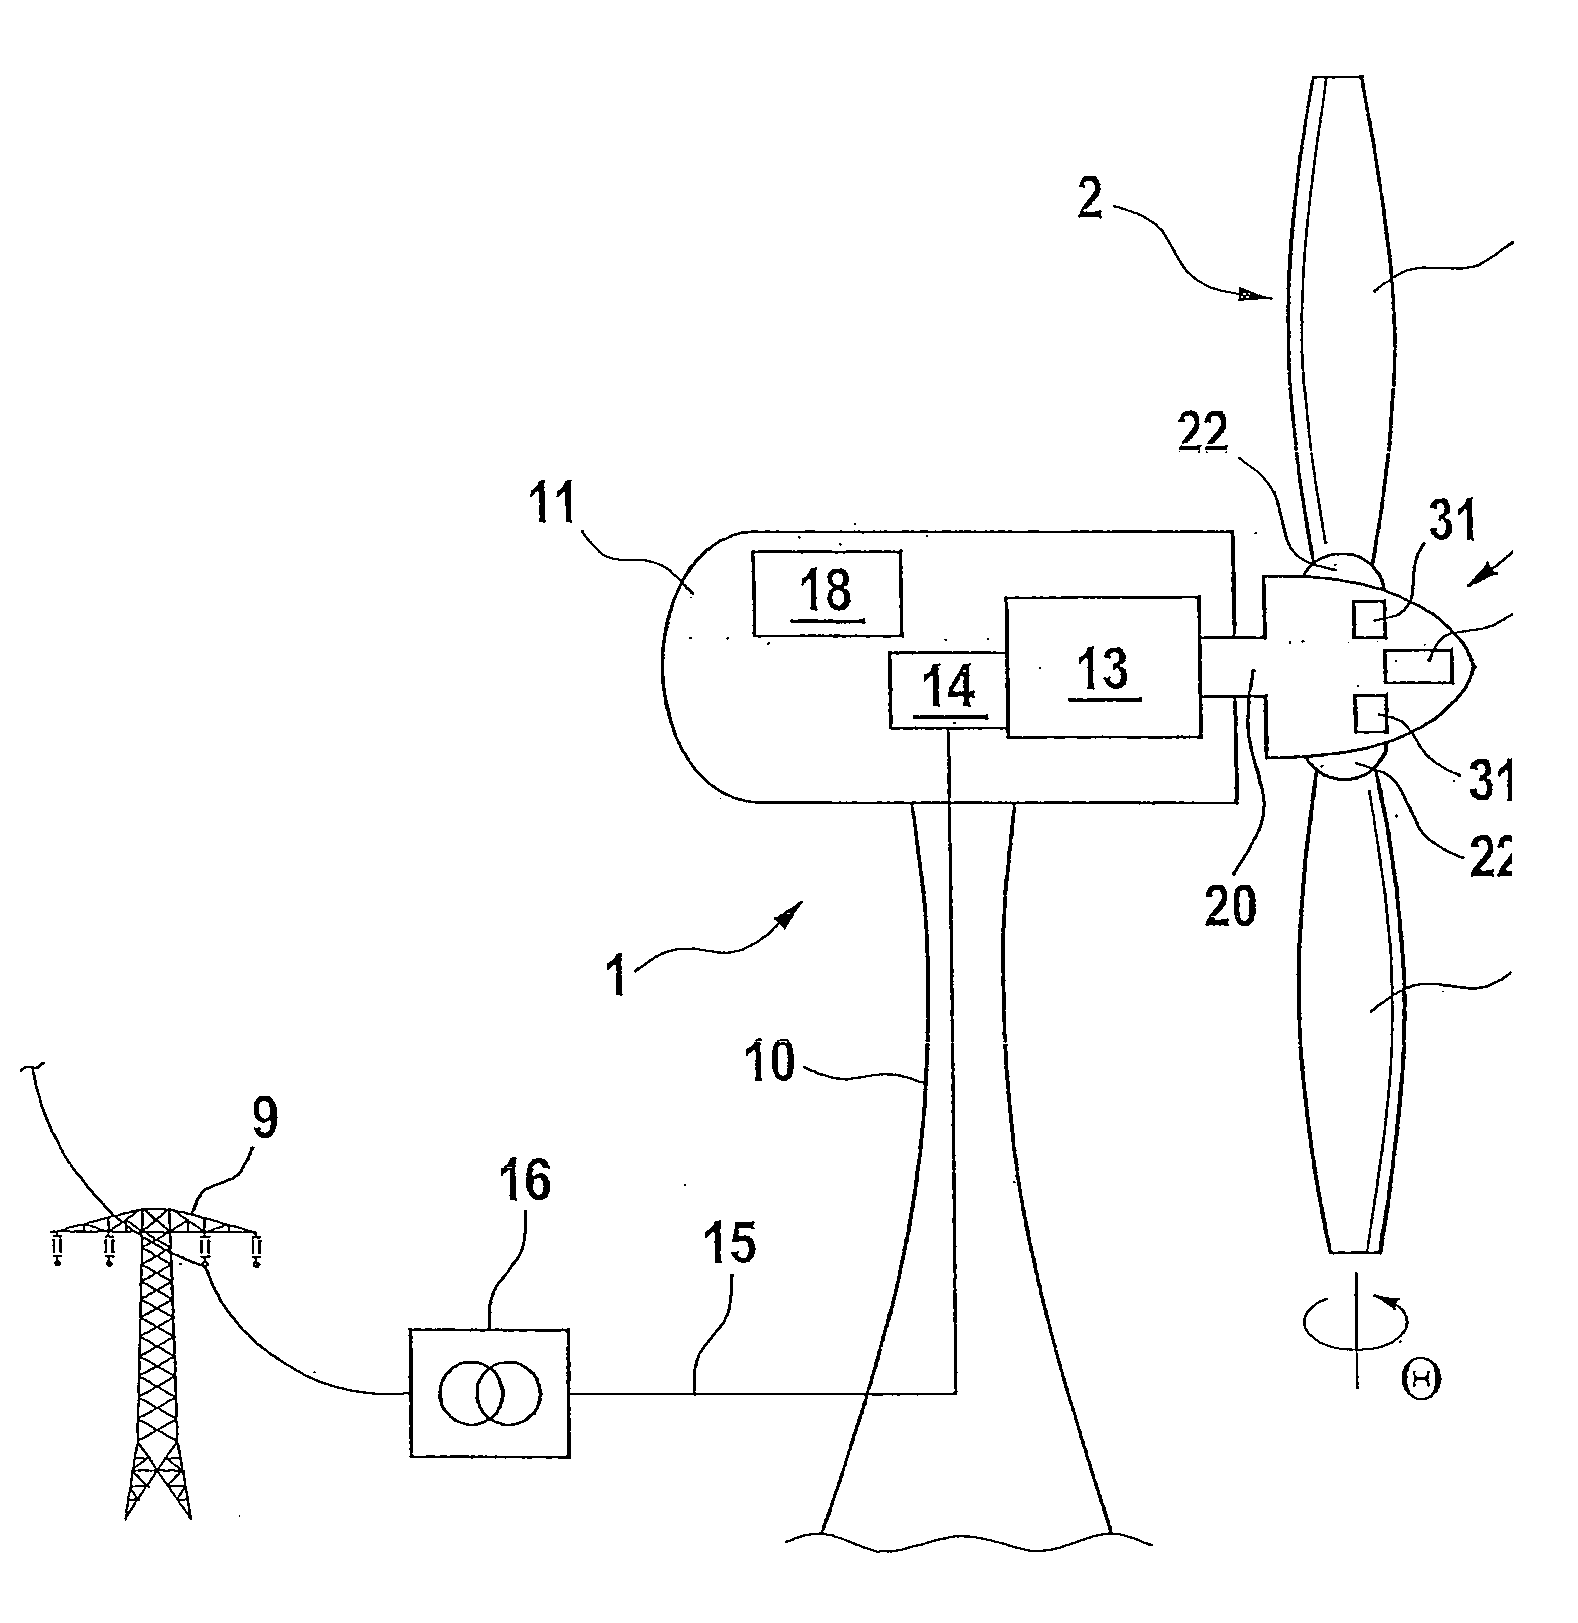 Energy Supply for a Blade Adjustment Device Pertaining to a Wind Energy Installation